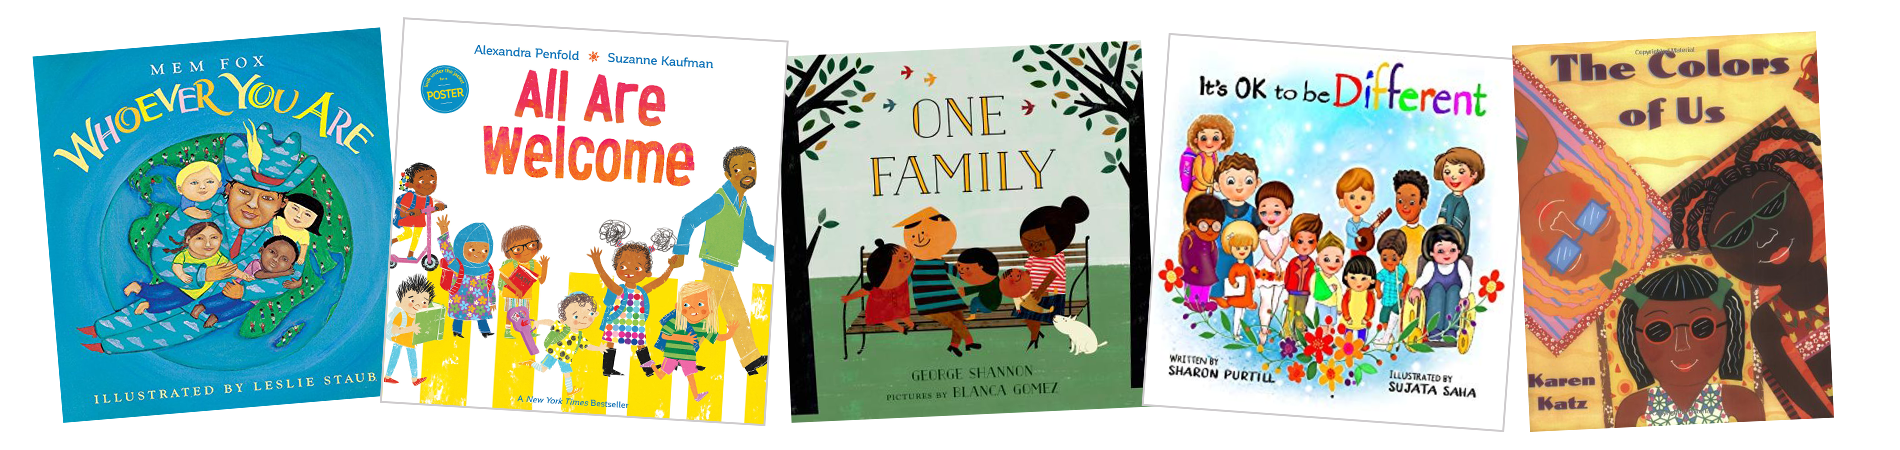 5 Children’s Books to Continue the Discussion About Diversity